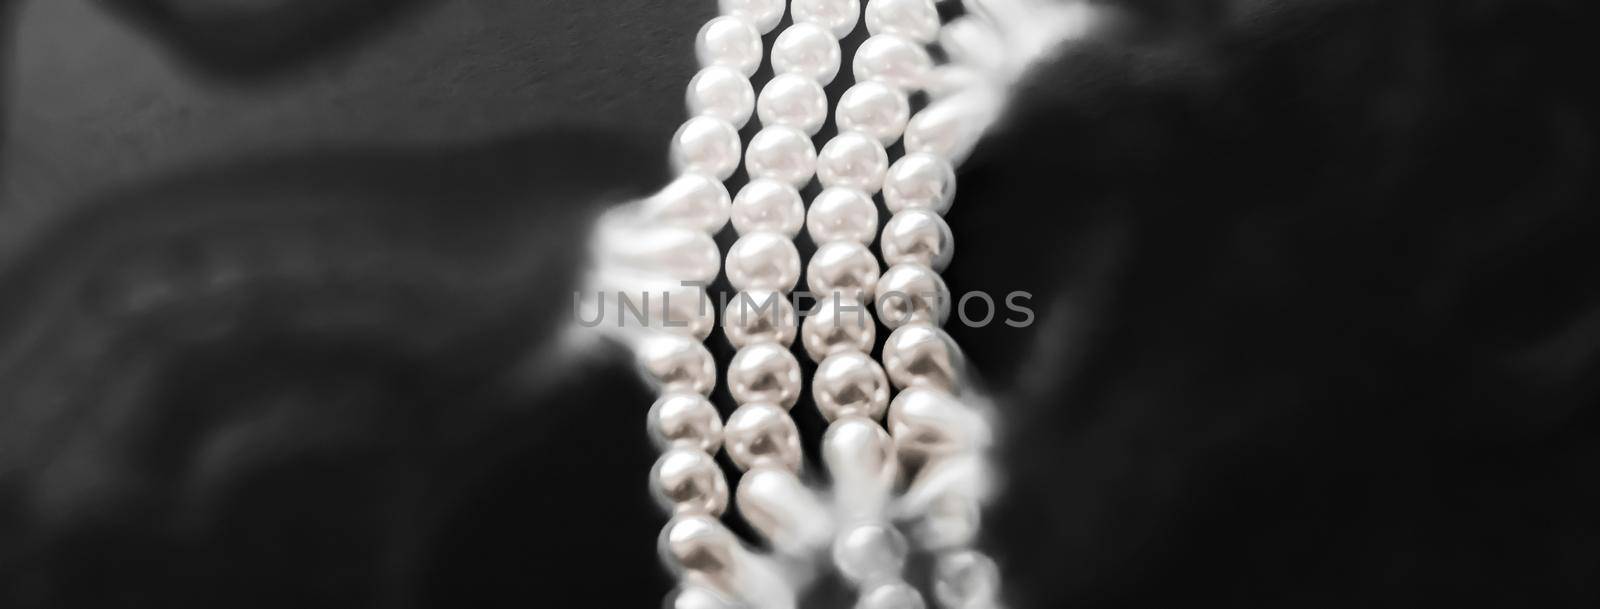 Jewelry, branding and gems concept - Coastal jewellery fashion, pearl necklace under black water background, glamour style present and chic gift for luxury jewelery brand, holiday banner design